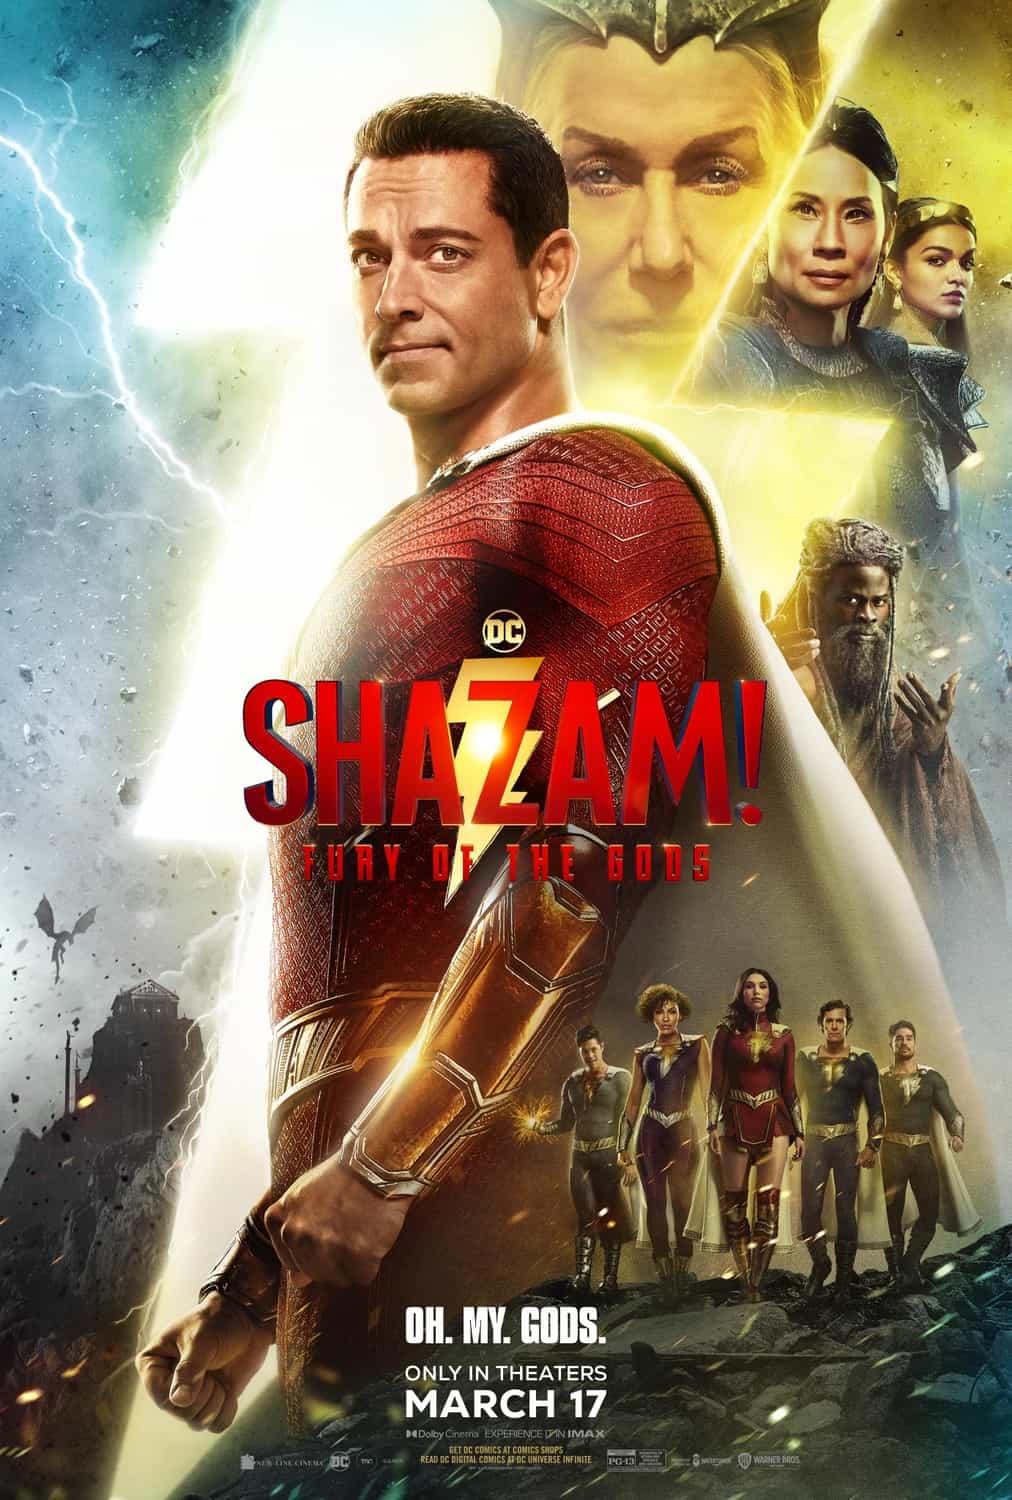 Global Box Office Weekend Report 17th - 19th March 2023:  Shazam! Fury of the Gods makes its debut at the top of the global box office with $65.5 Million